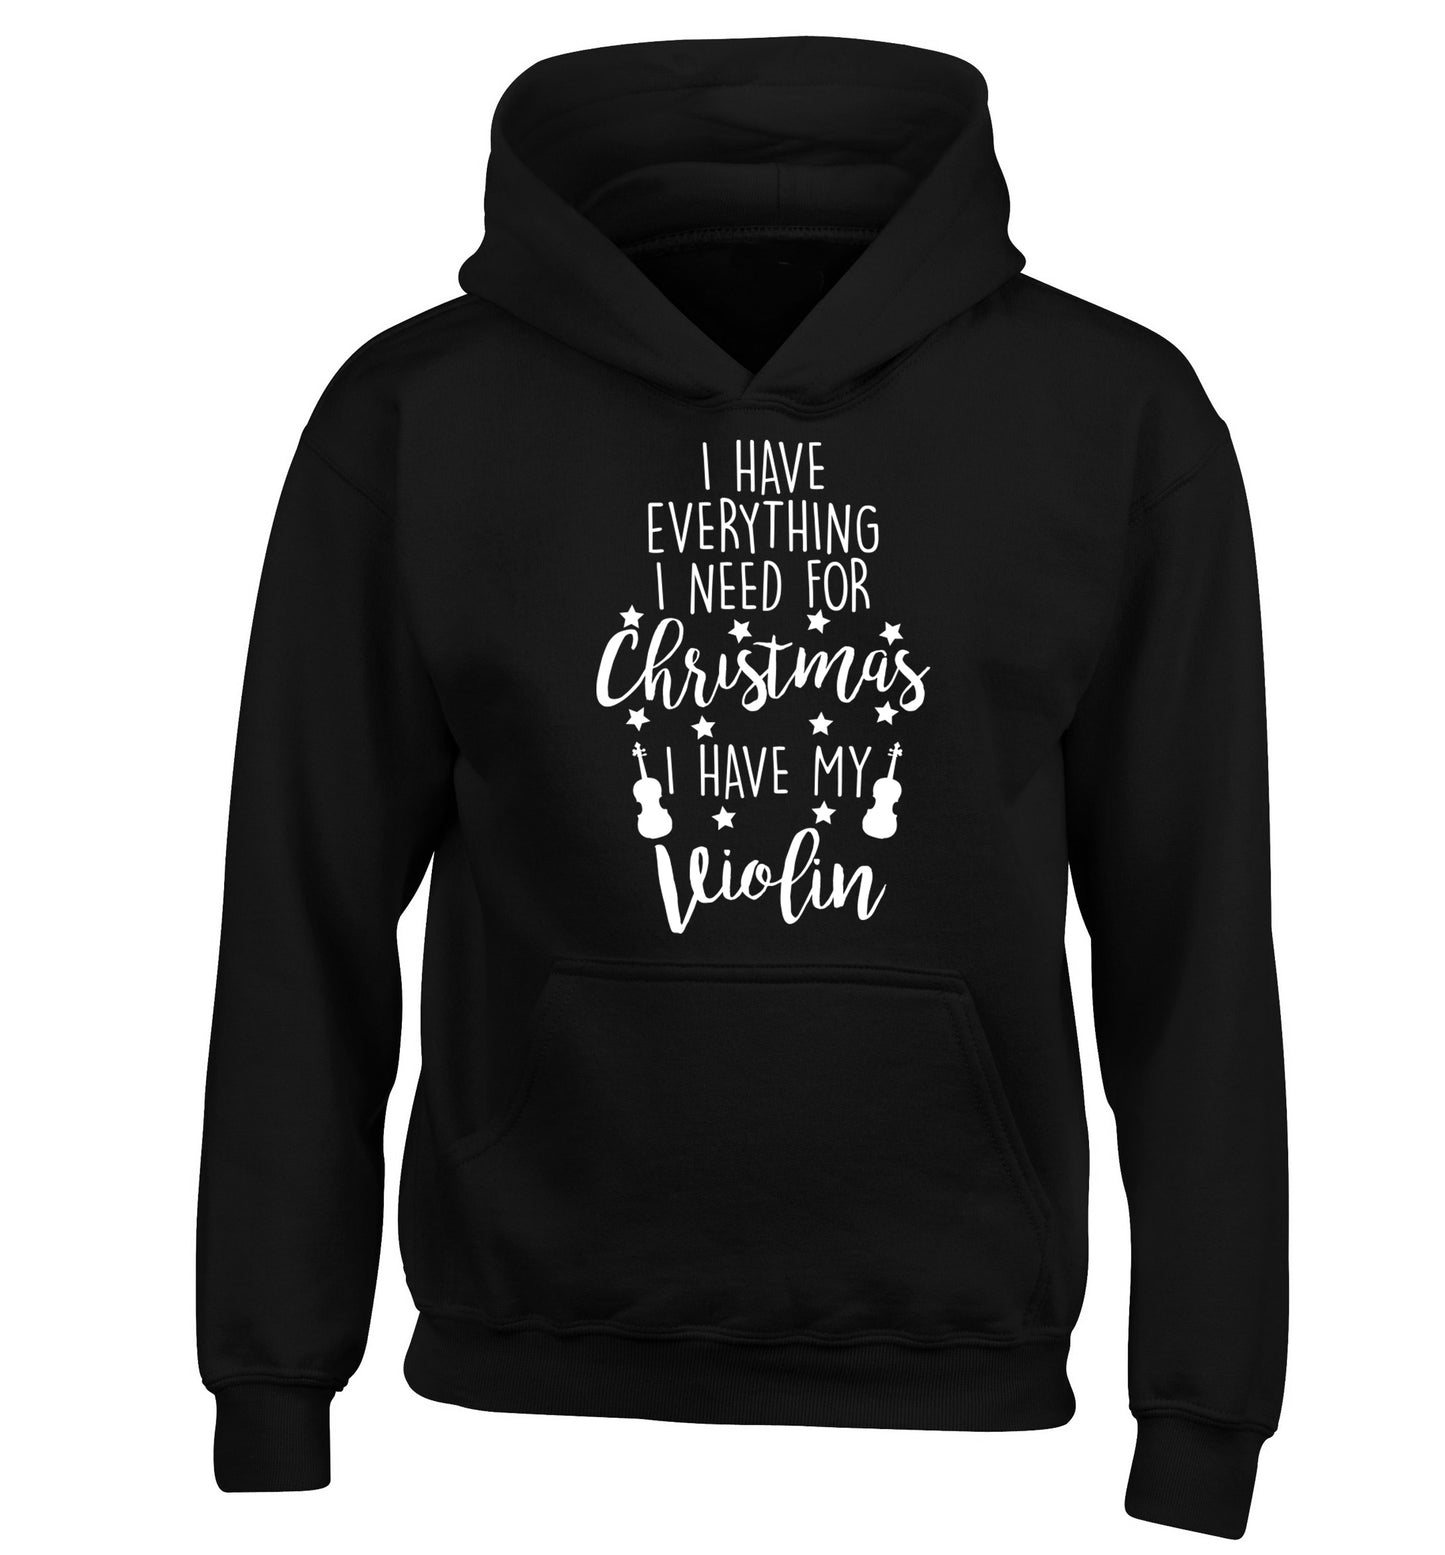 I have everything I need for Christmas I have my violin children's black hoodie 12-13 Years